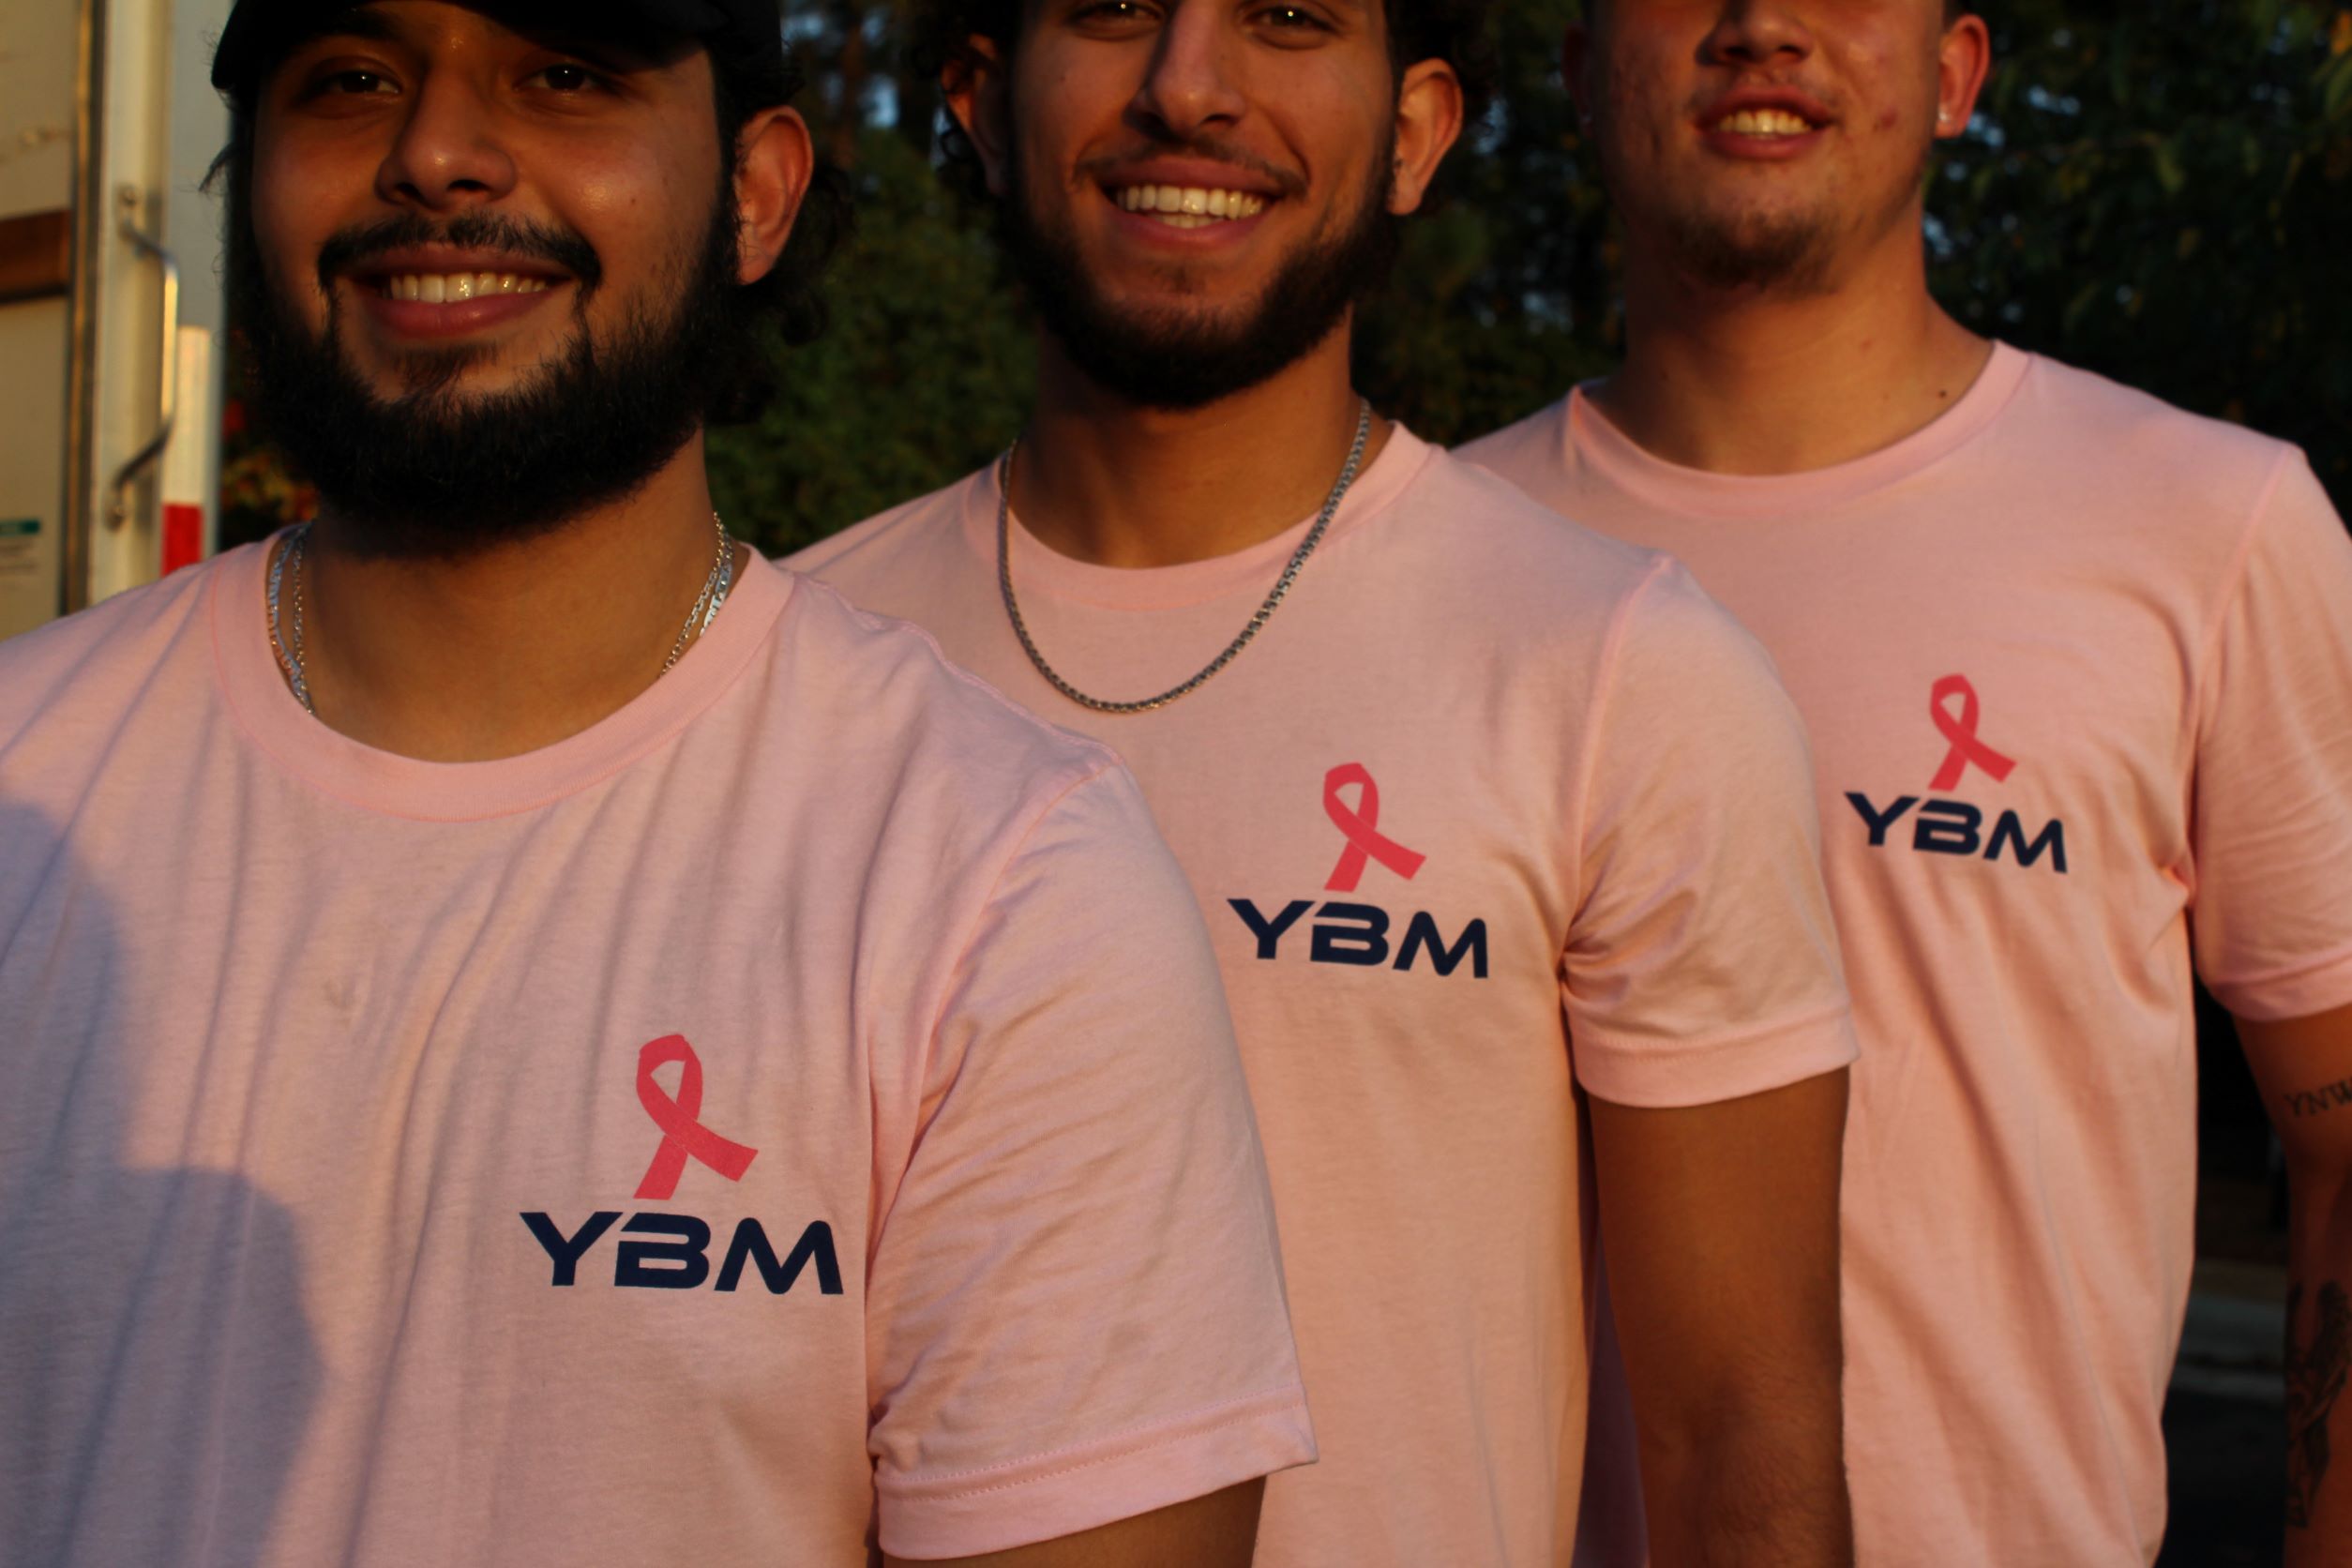 YBM crew leaders showing the breast cancer awareness merch